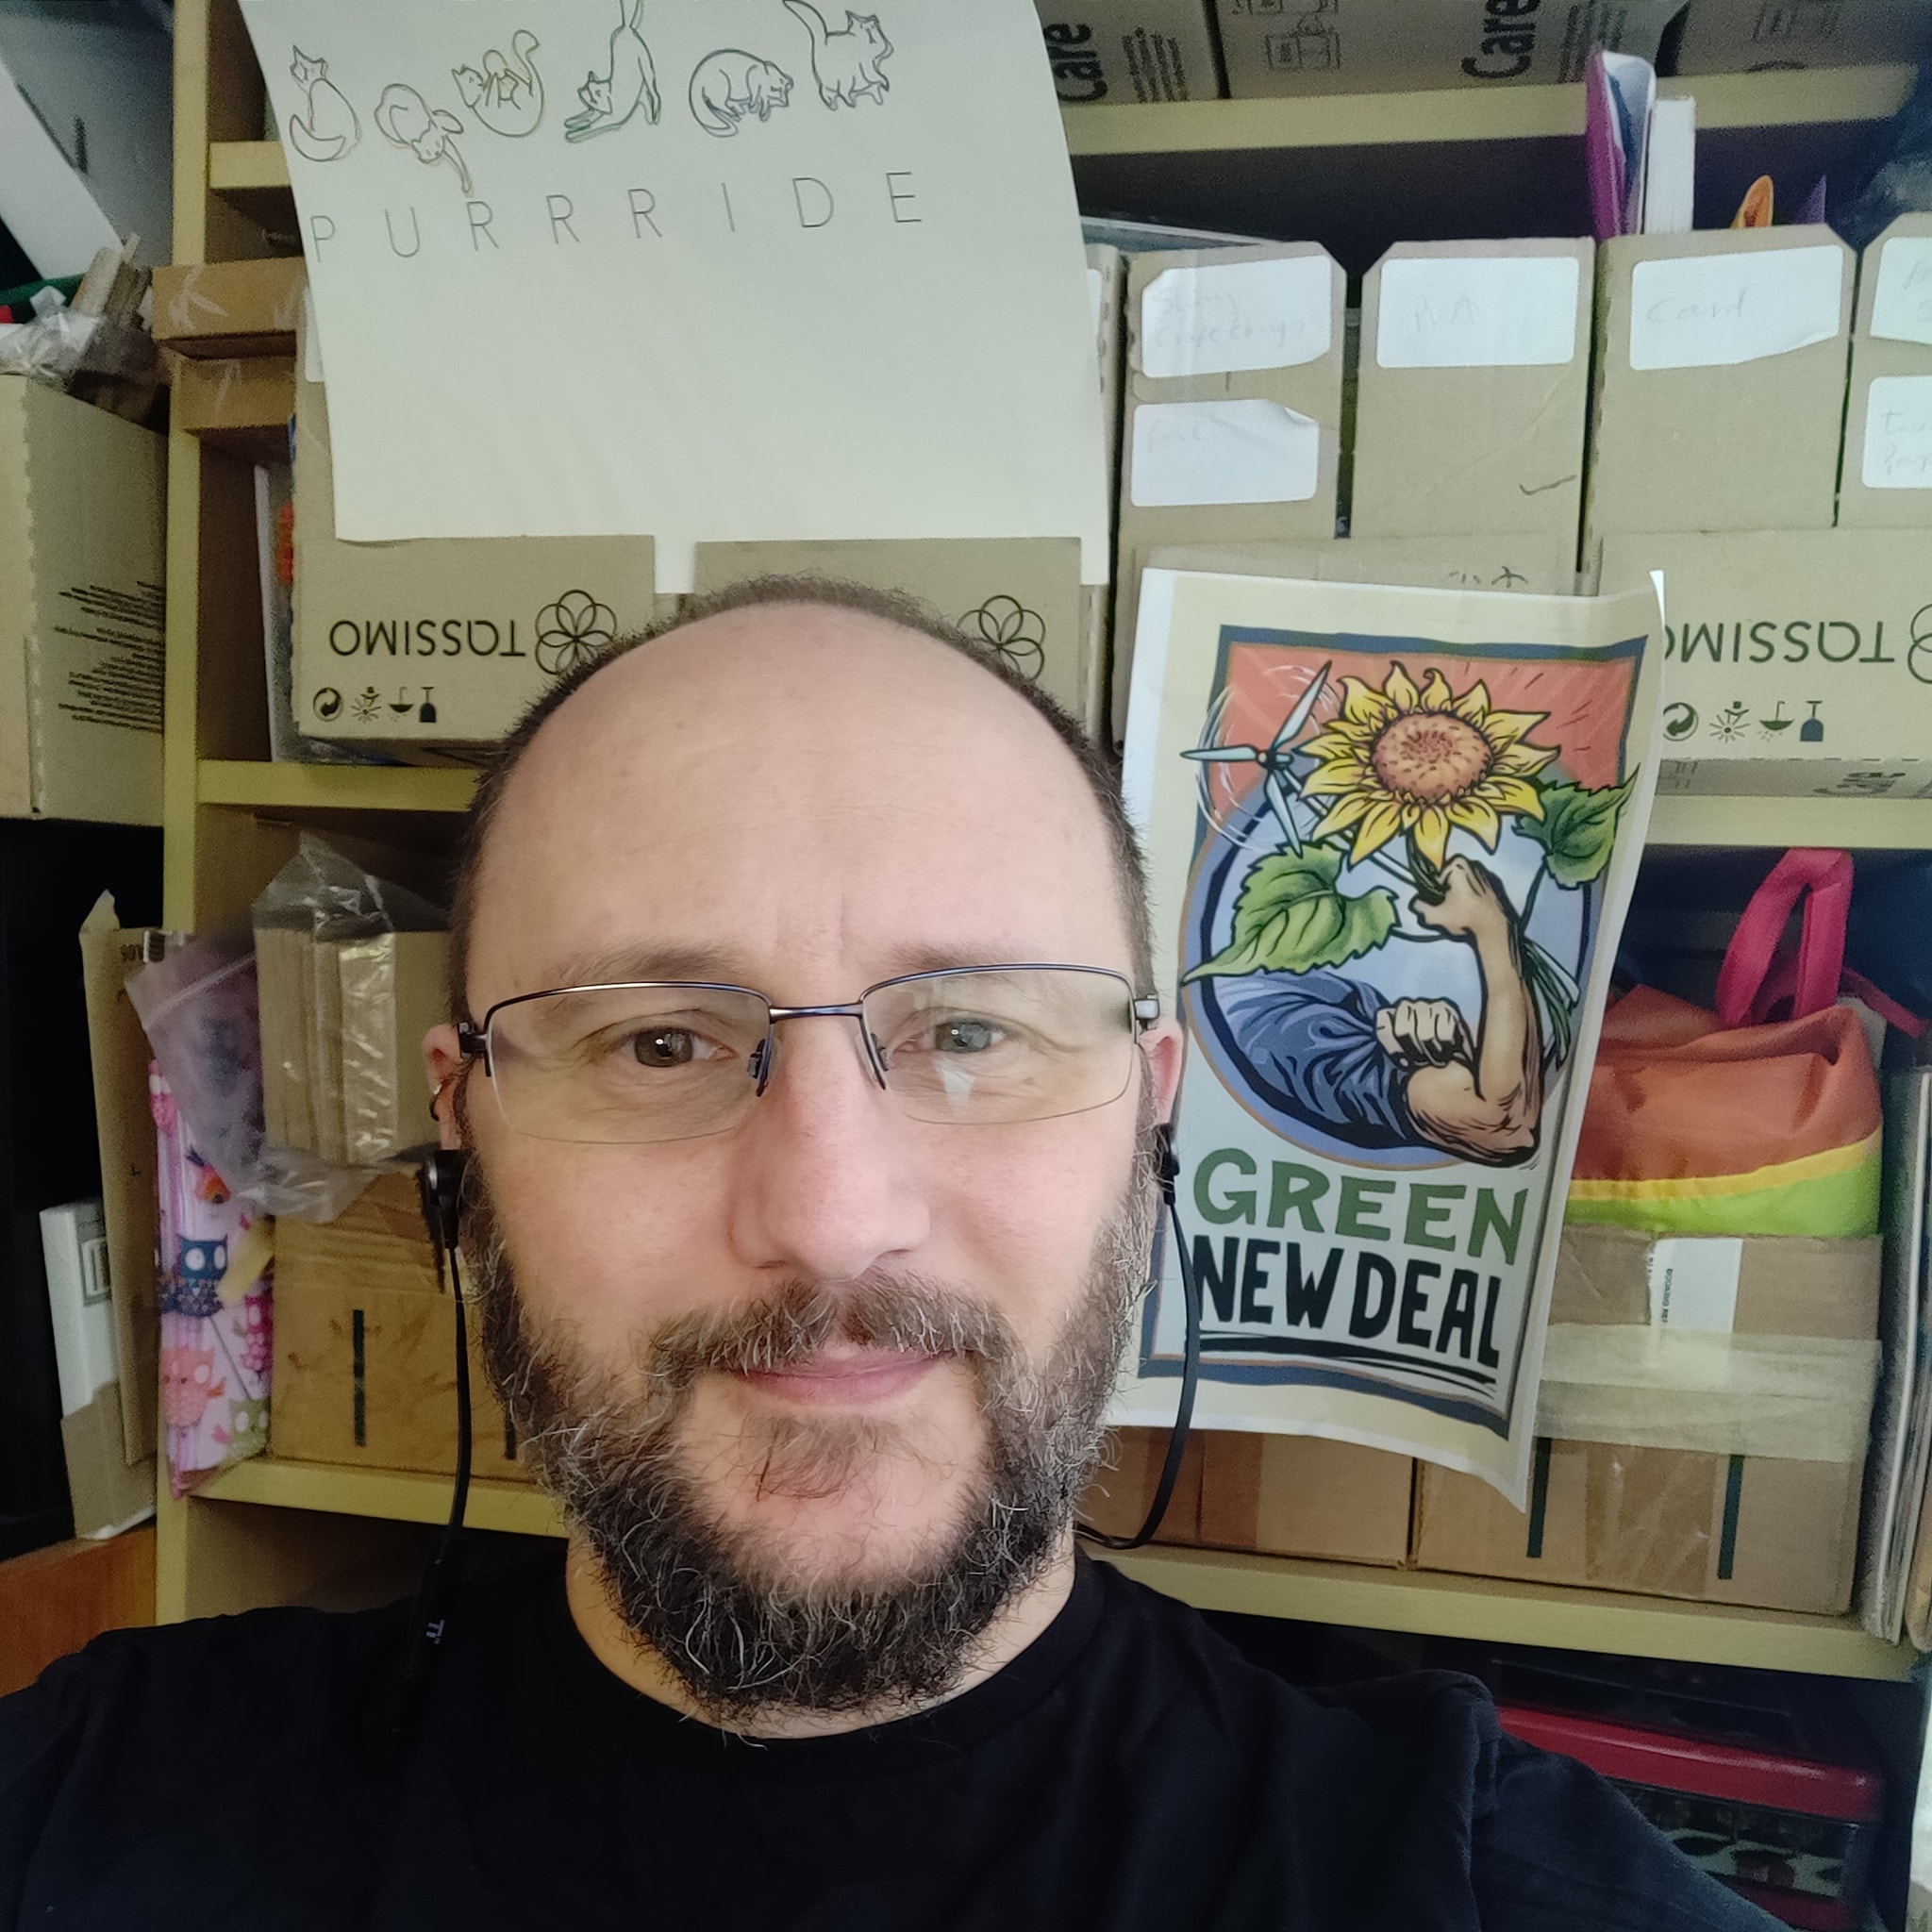 Owen Blacker, a white man with glasses, short hair and a greying beard. Behind him is a poster about a Green New Deal, in the style of Rosie the Riveter, with her arm holding a large sunflower and the tower of a wind turbine. Also visible is a rainbow-coloured poster featuring cats and the word “Purrride”